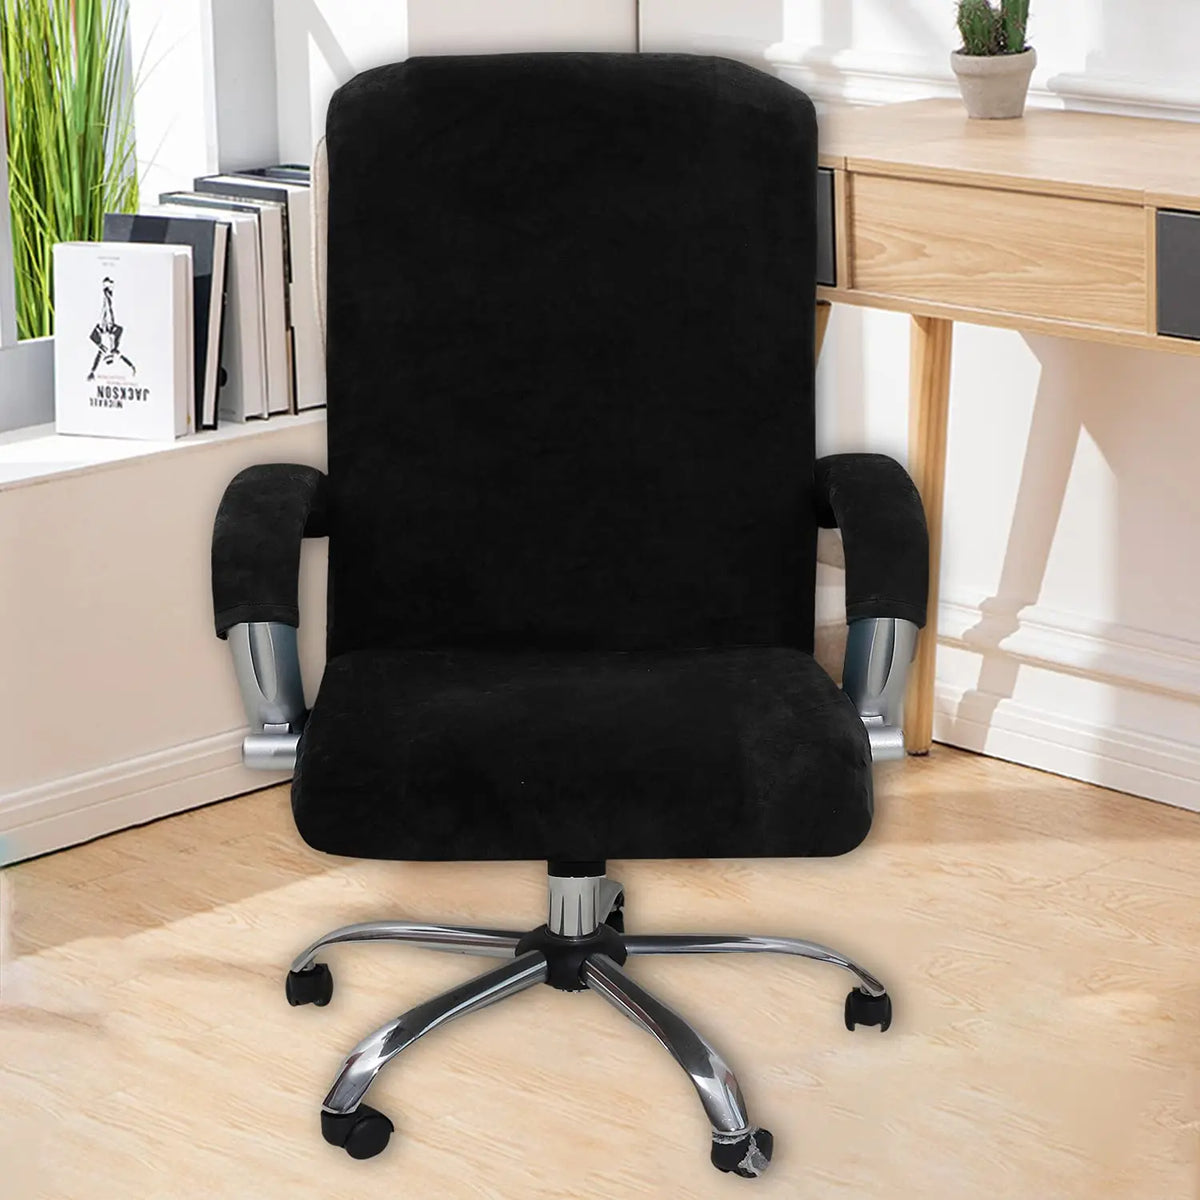 Crfatop Velvet Office Chair Cover with Arm Covers